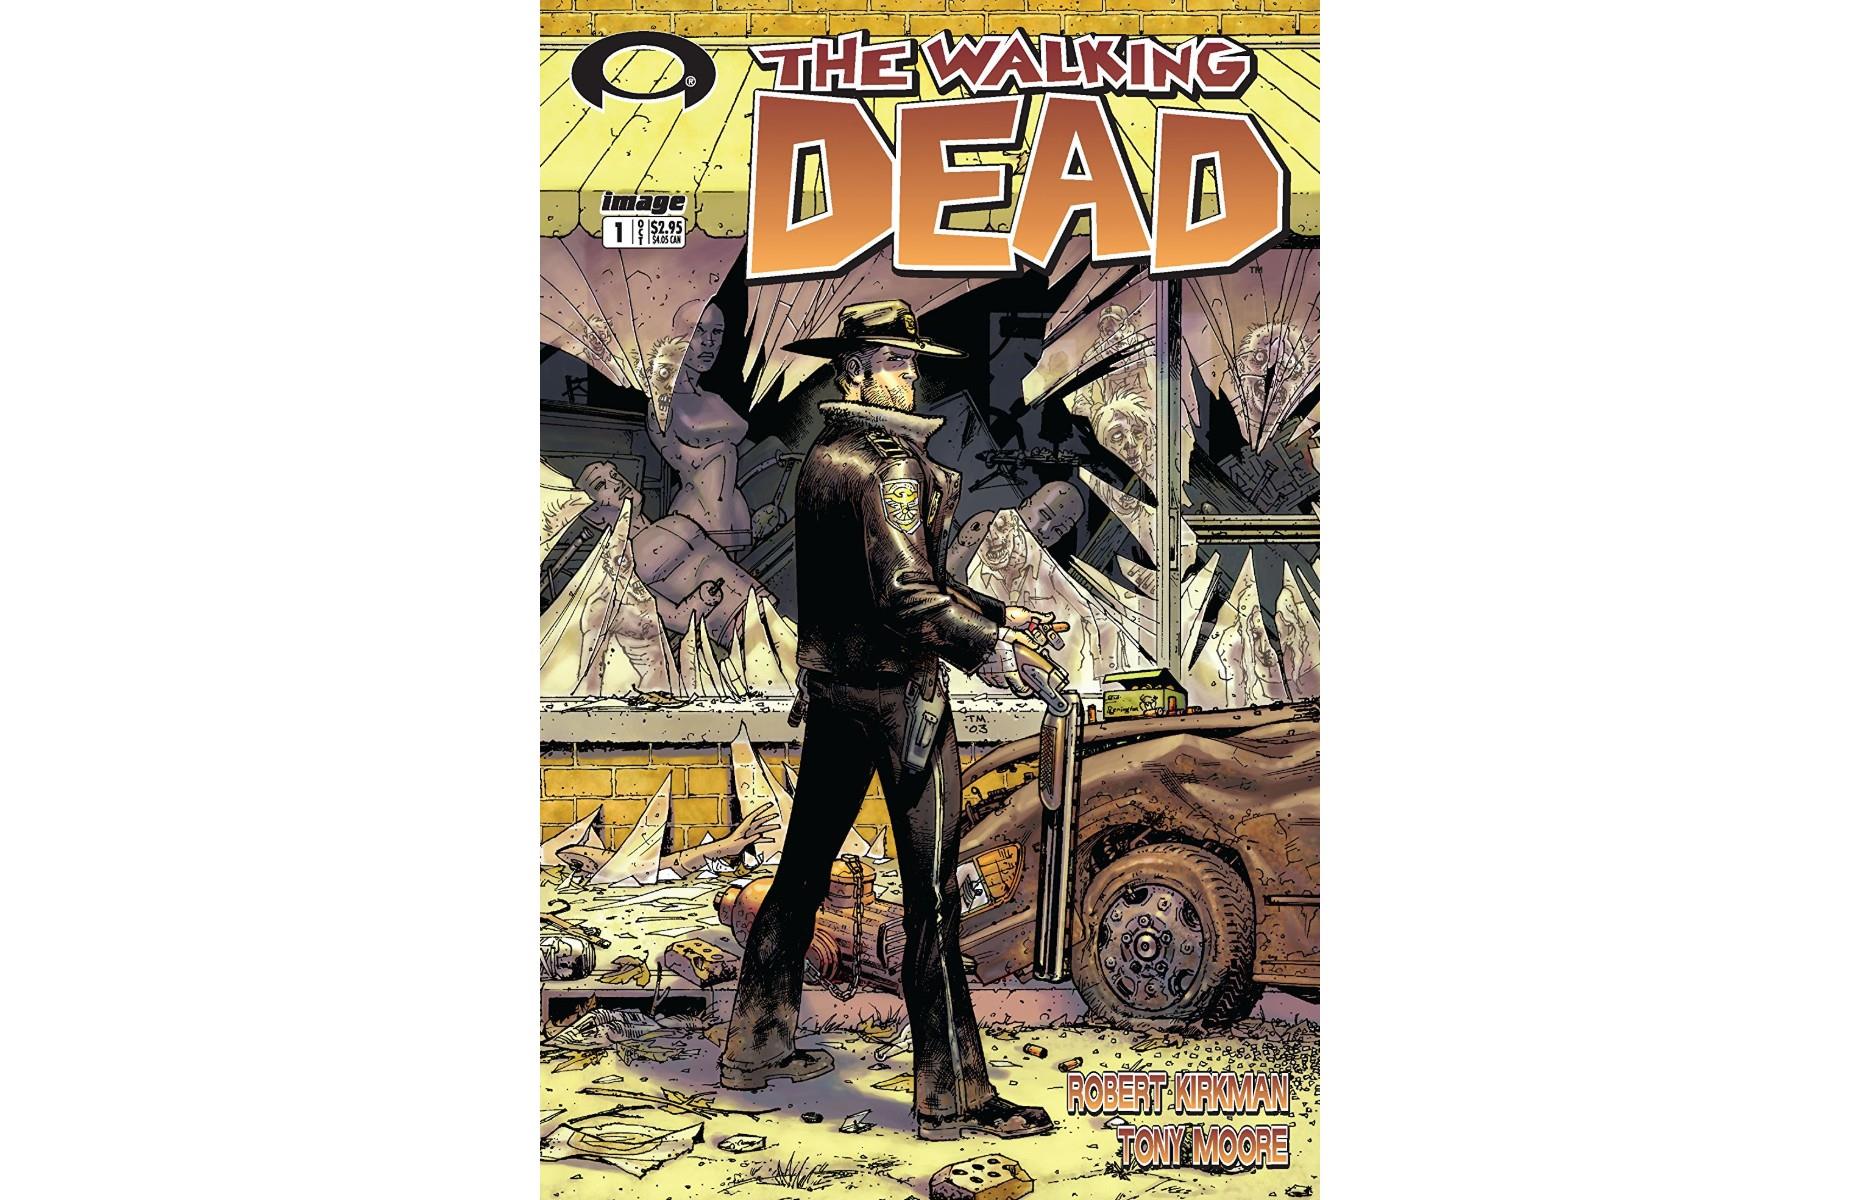 Walking Dead #1: up to £1,500 ($2,000)